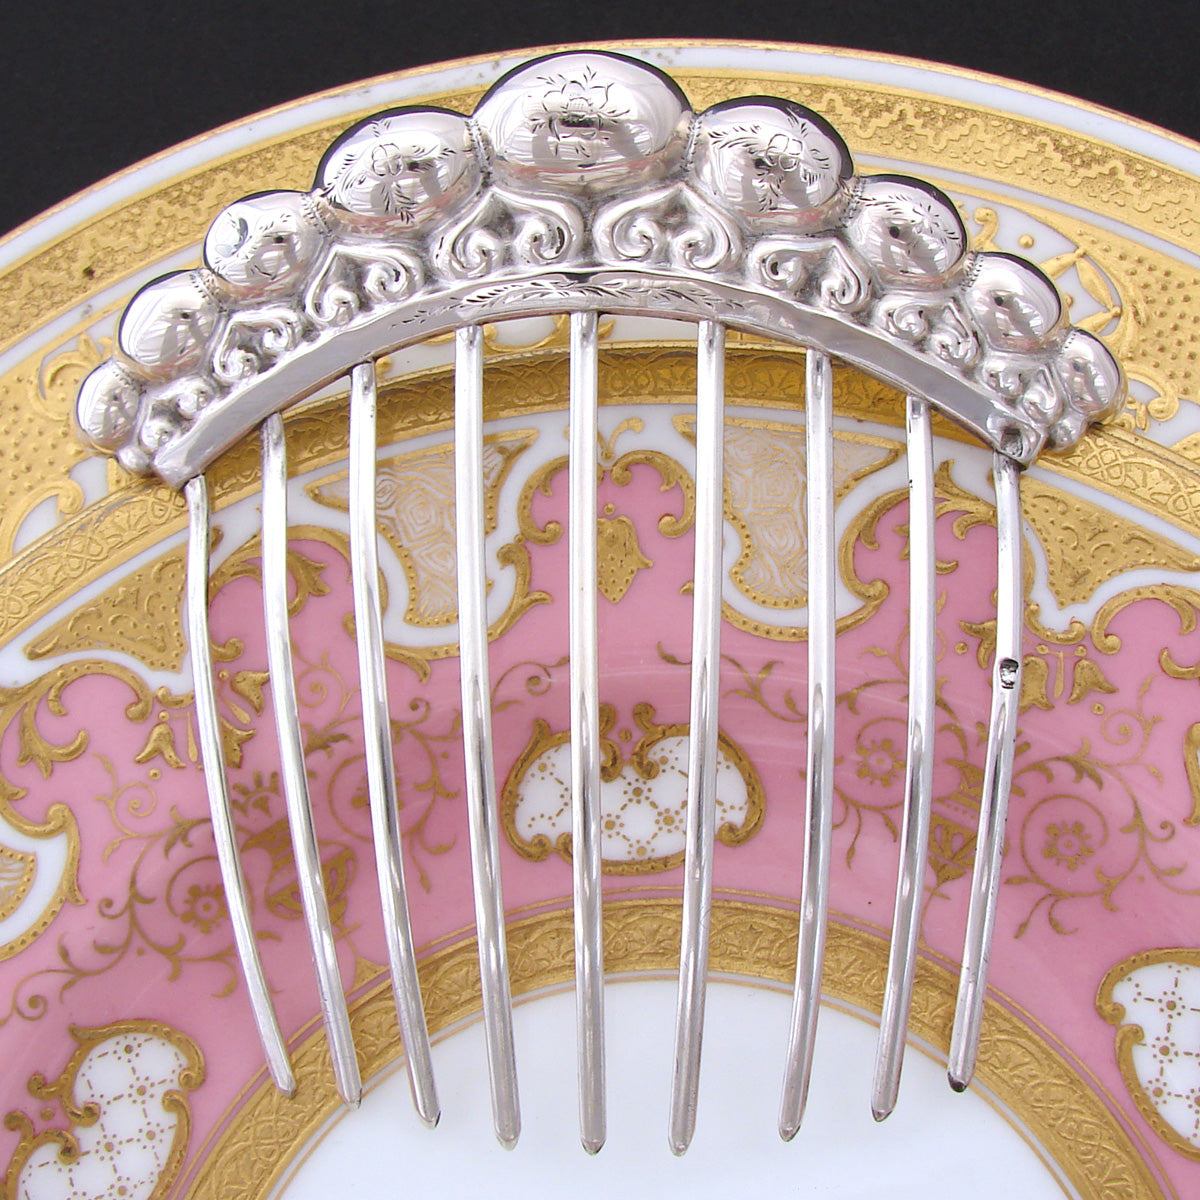 Lovely Antique French .800 (nearly sterling) Silver 4.25" Mantilla Style Hair Ornament, Comb or Tiara